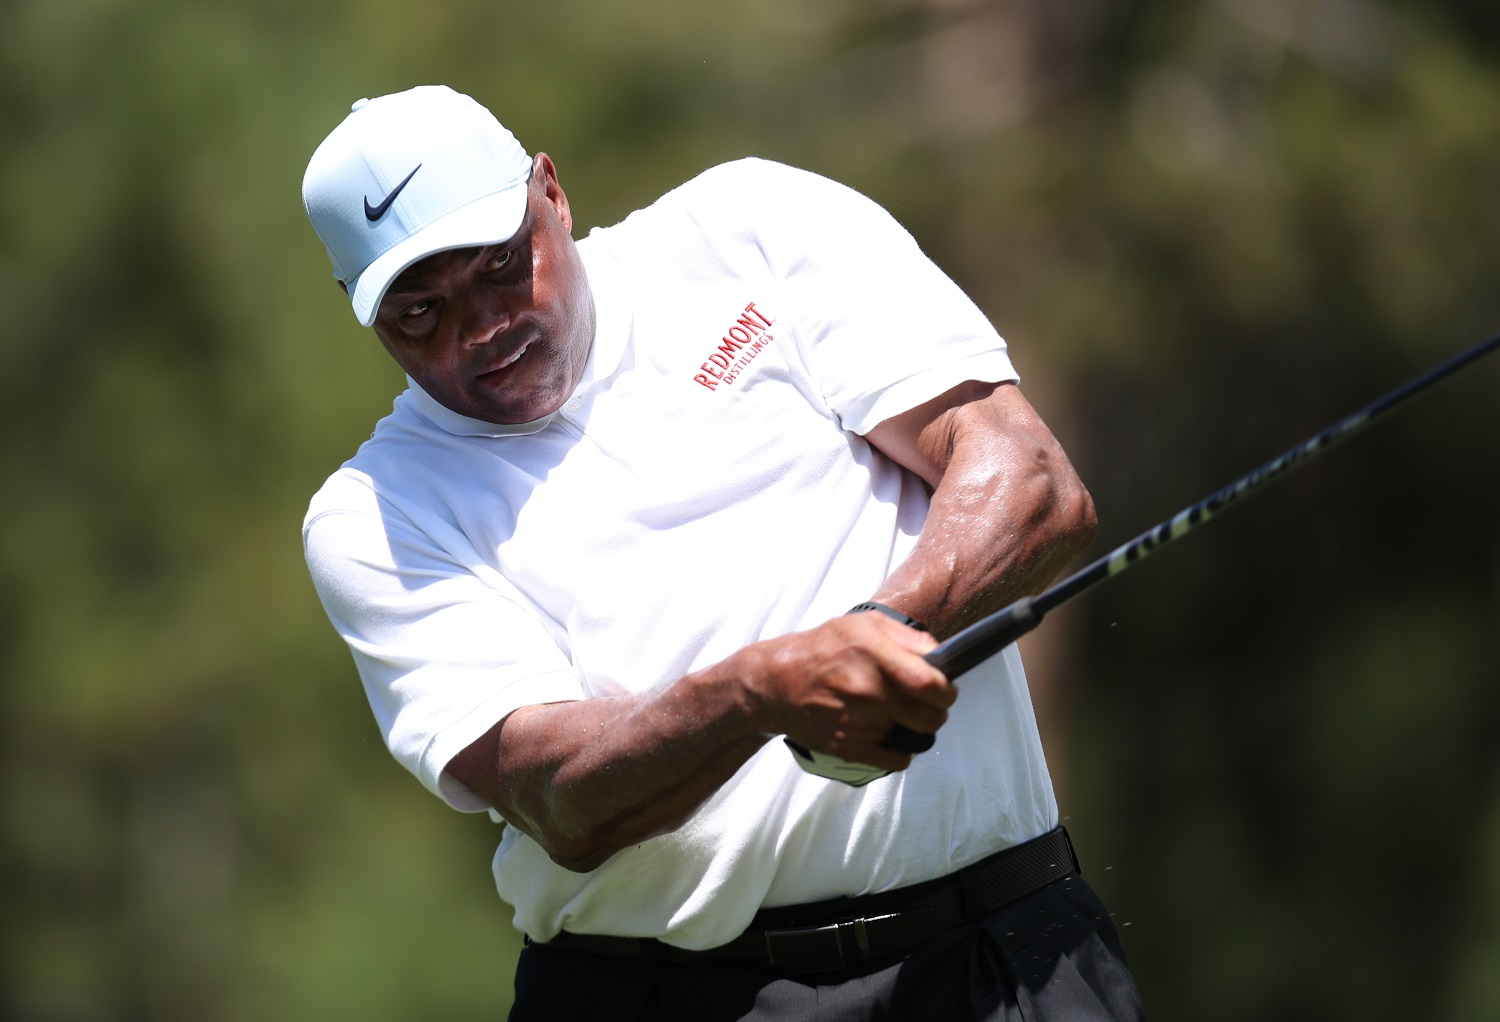 NBA analyst Charles Barkley tees off during the opening round of the American Century Championship at Edgewood Tahoe South golf course.